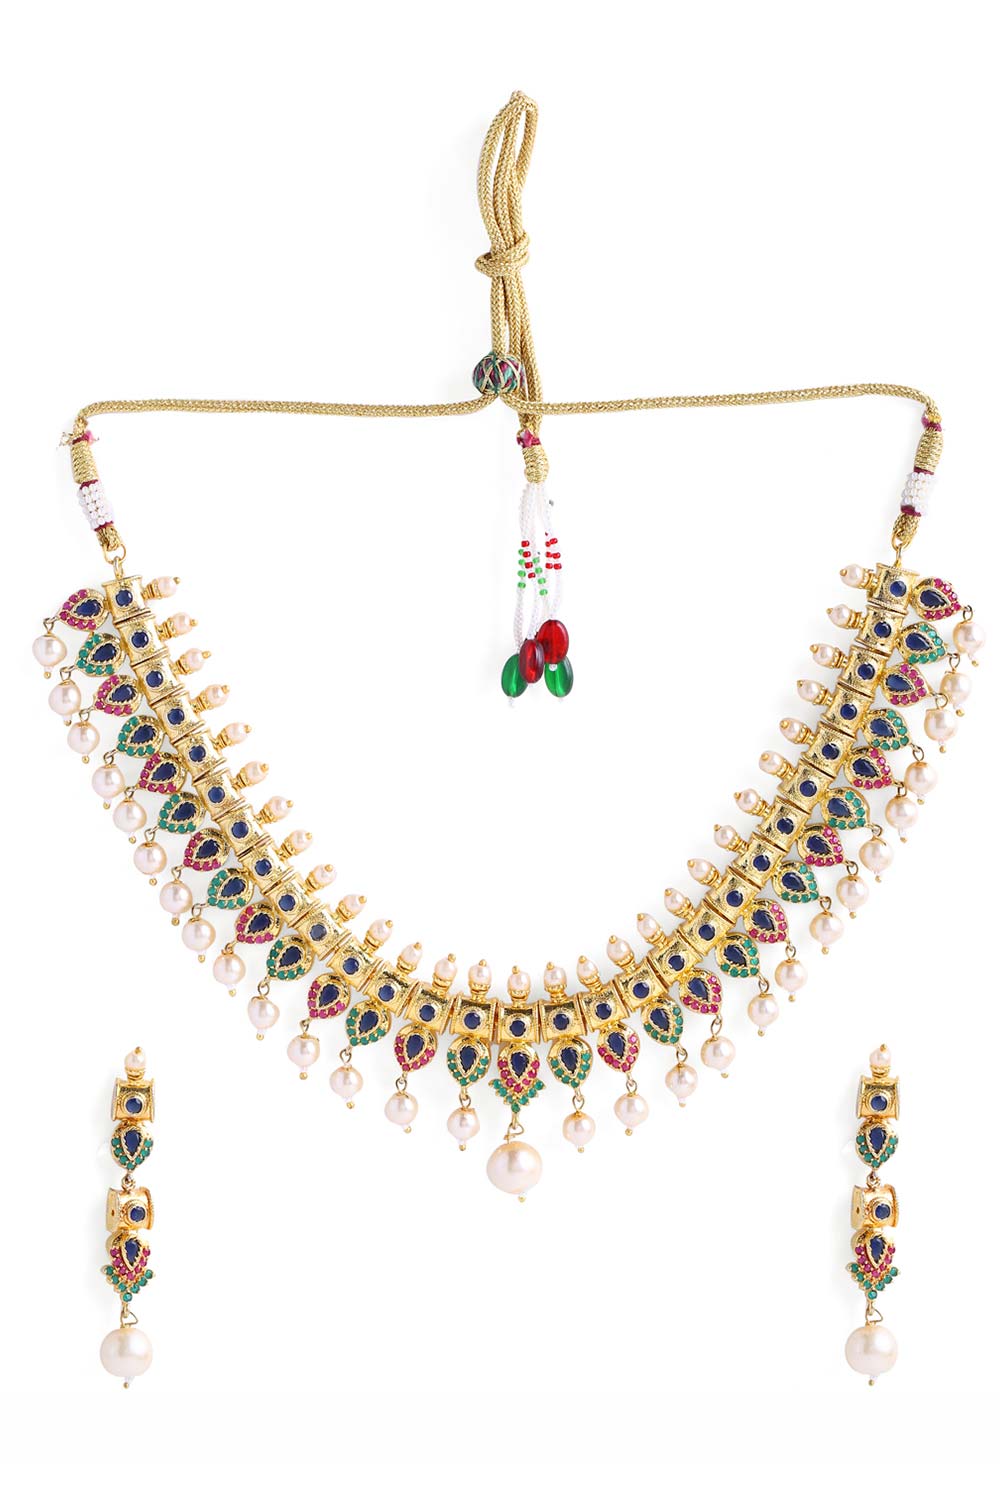 Buy Gold Toned And Stone-Studded Jewellery Set Online - Side